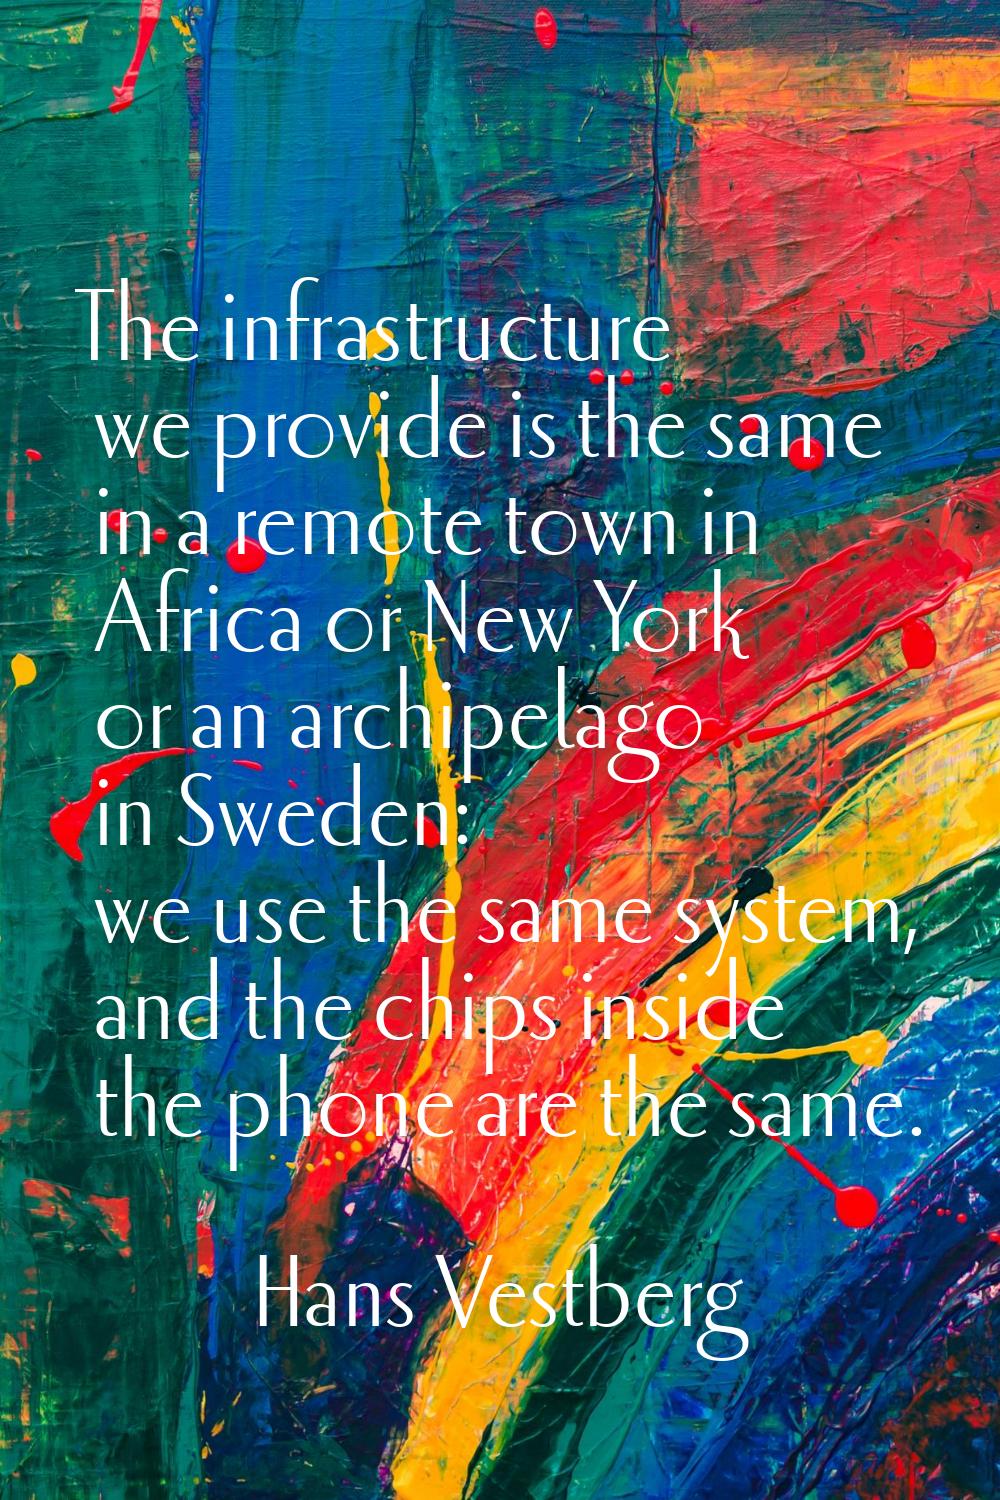 The infrastructure we provide is the same in a remote town in Africa or New York or an archipelago 